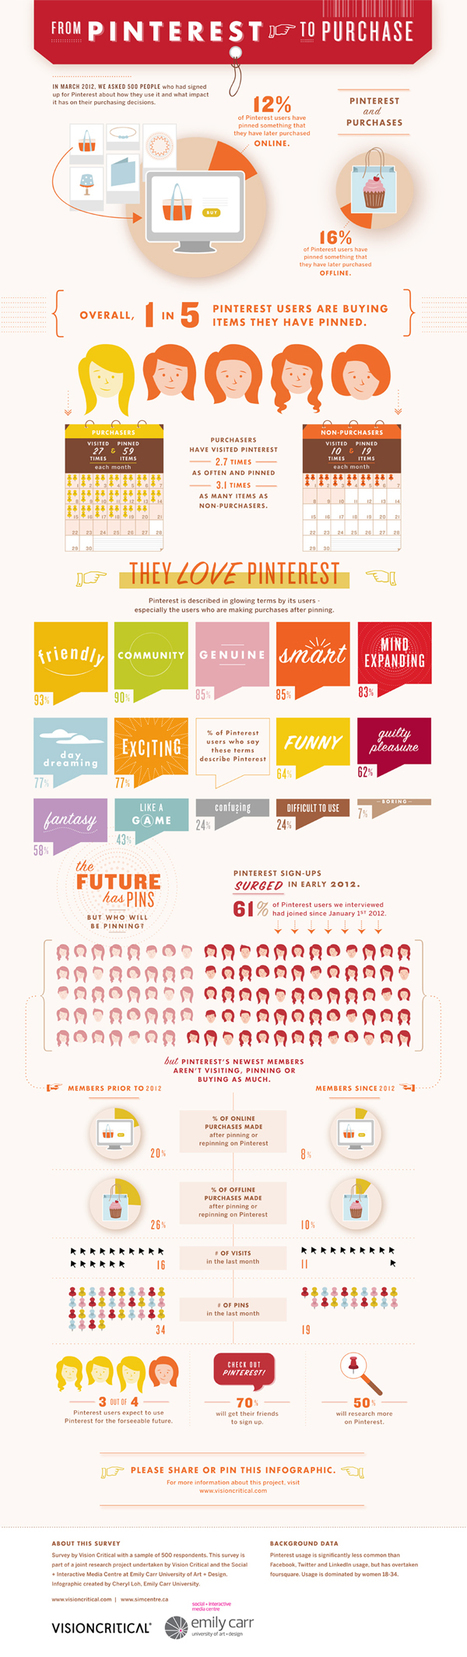 From Pinterest to Purchase [Infographic] | FRESH | Scoop.it